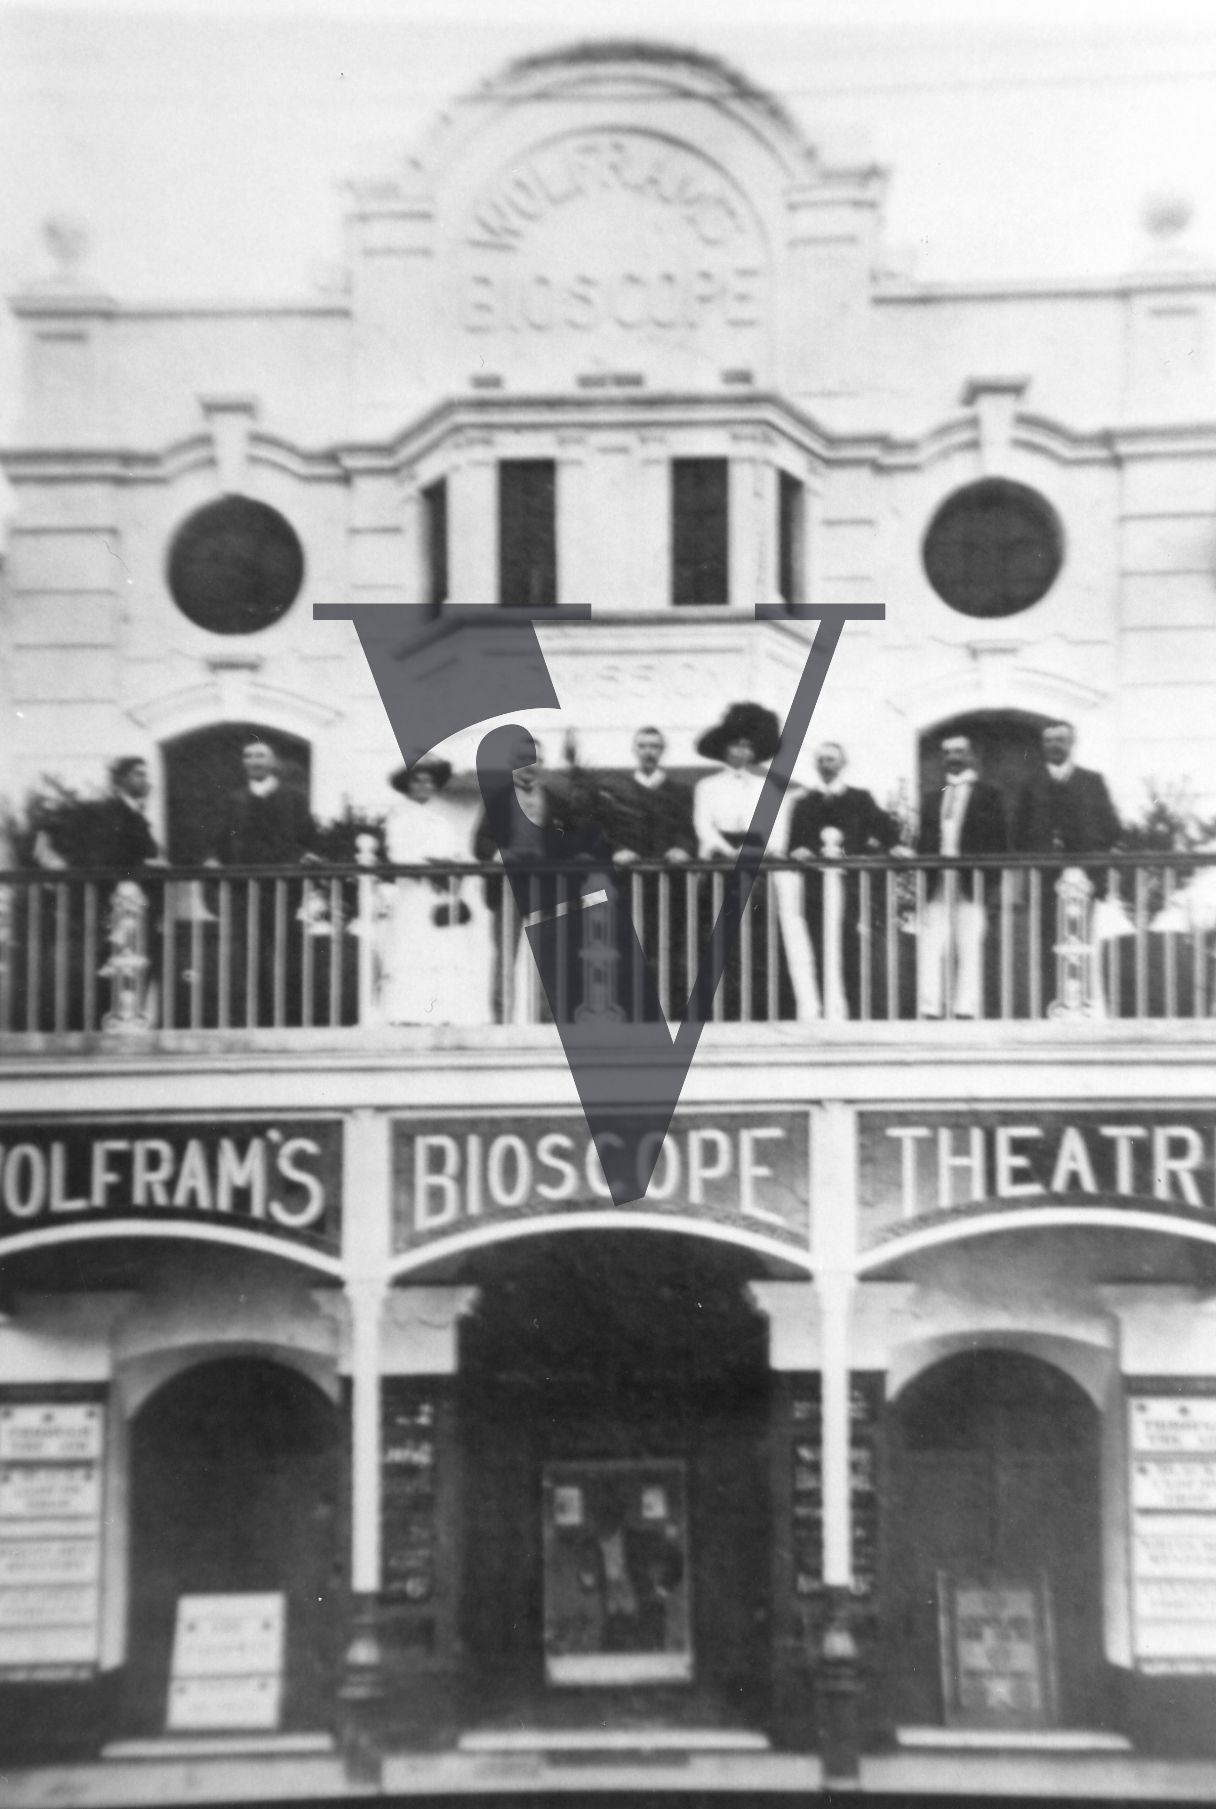 Wolfram's Bioscope Theatre, early cinema, exterior, St.George's Street Cape Town.